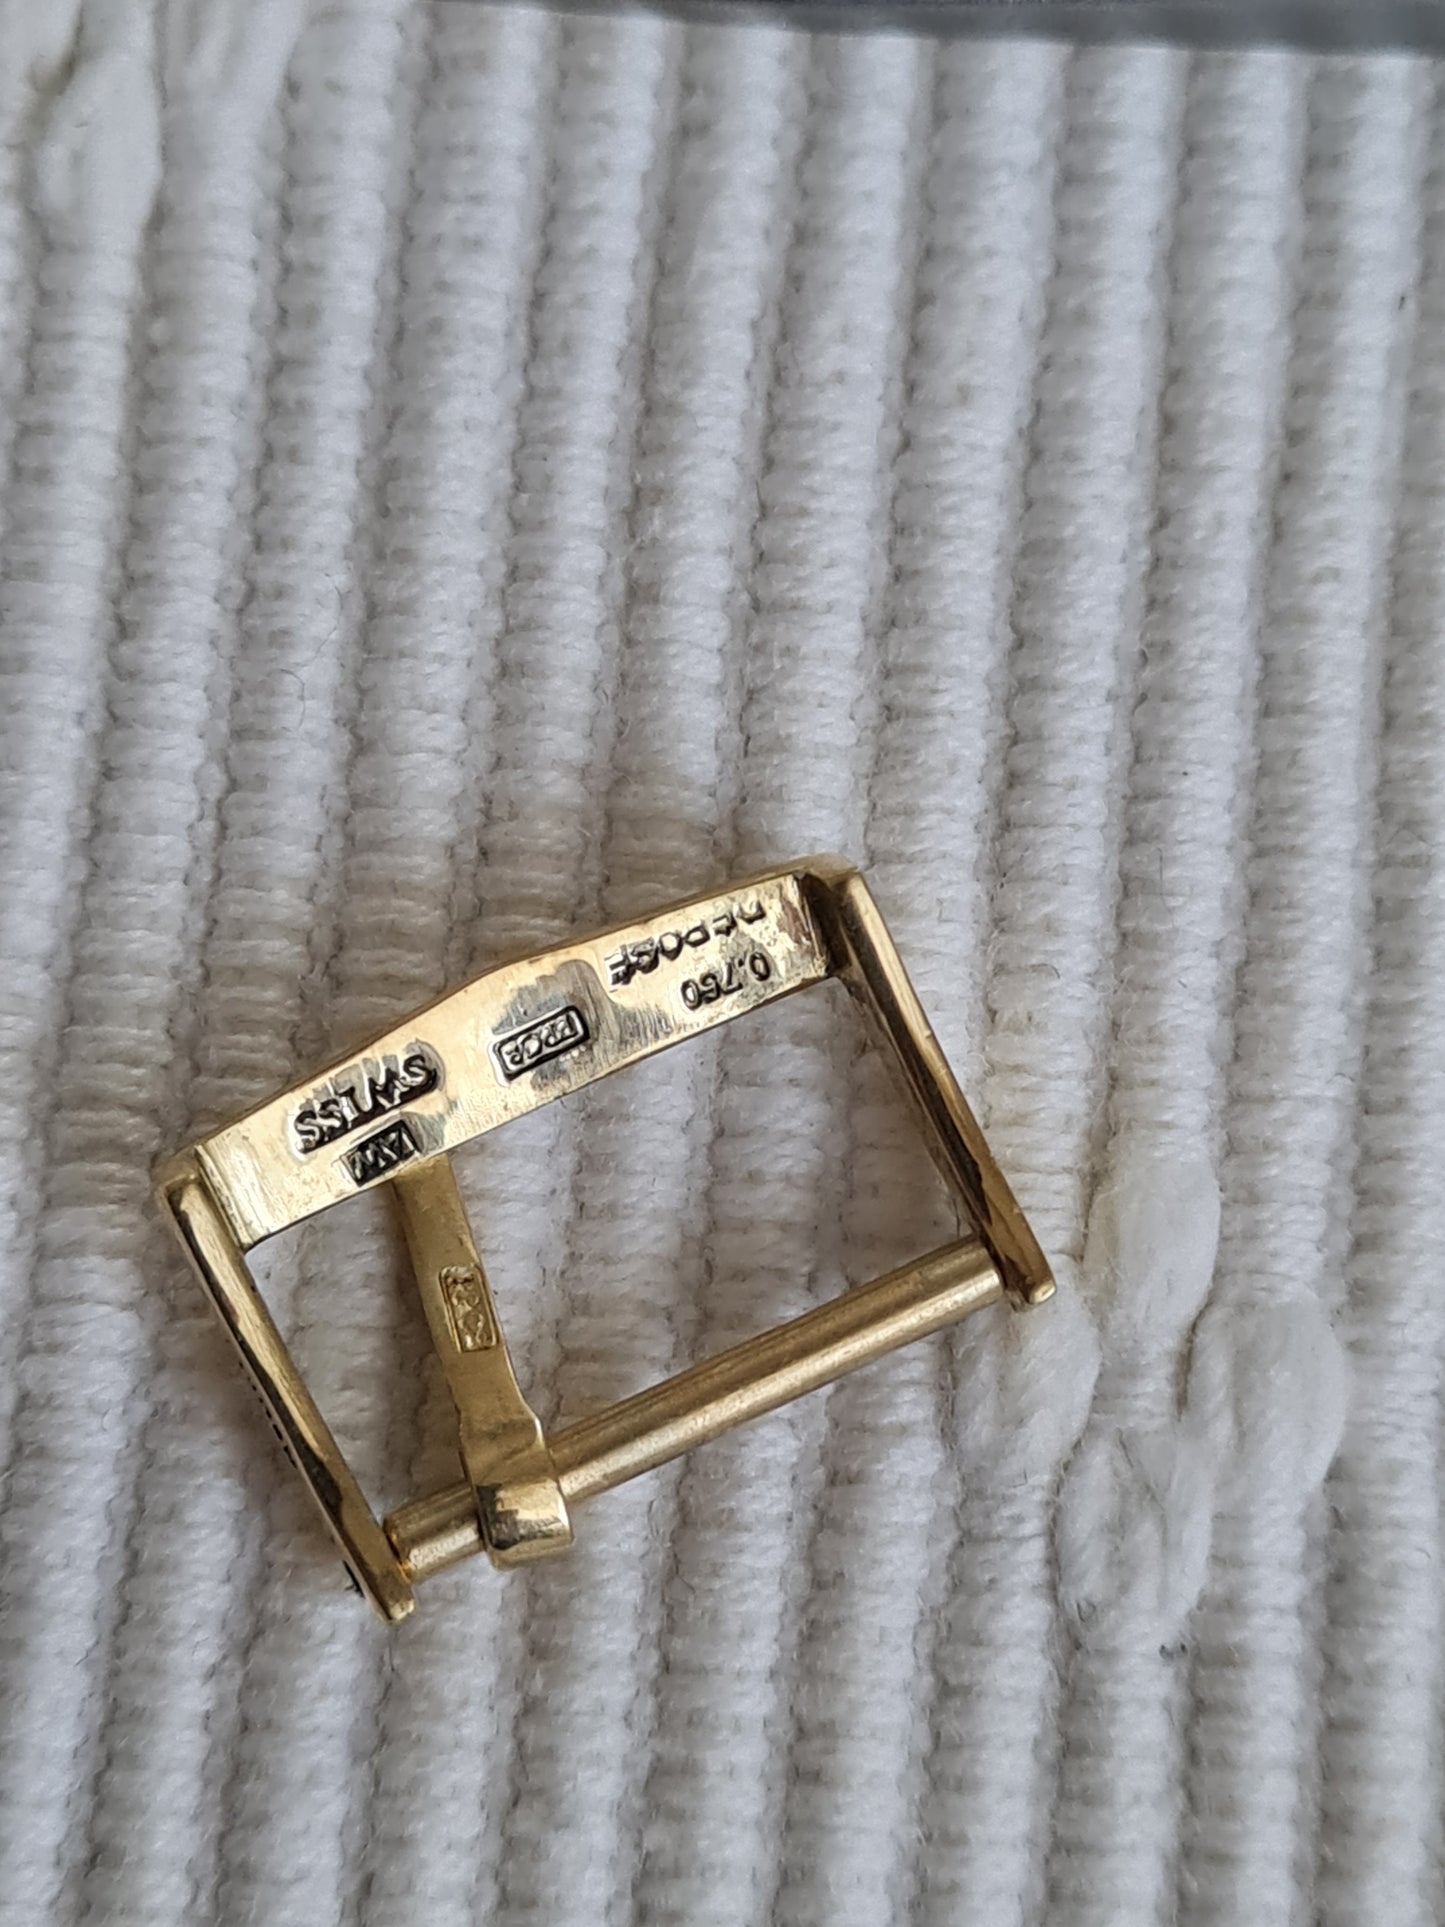 PATEK PHILIPPE ( STAMPED DEPOSE GENEVE ) YELLOW GOLD 0.750 WATCH BUCKLE